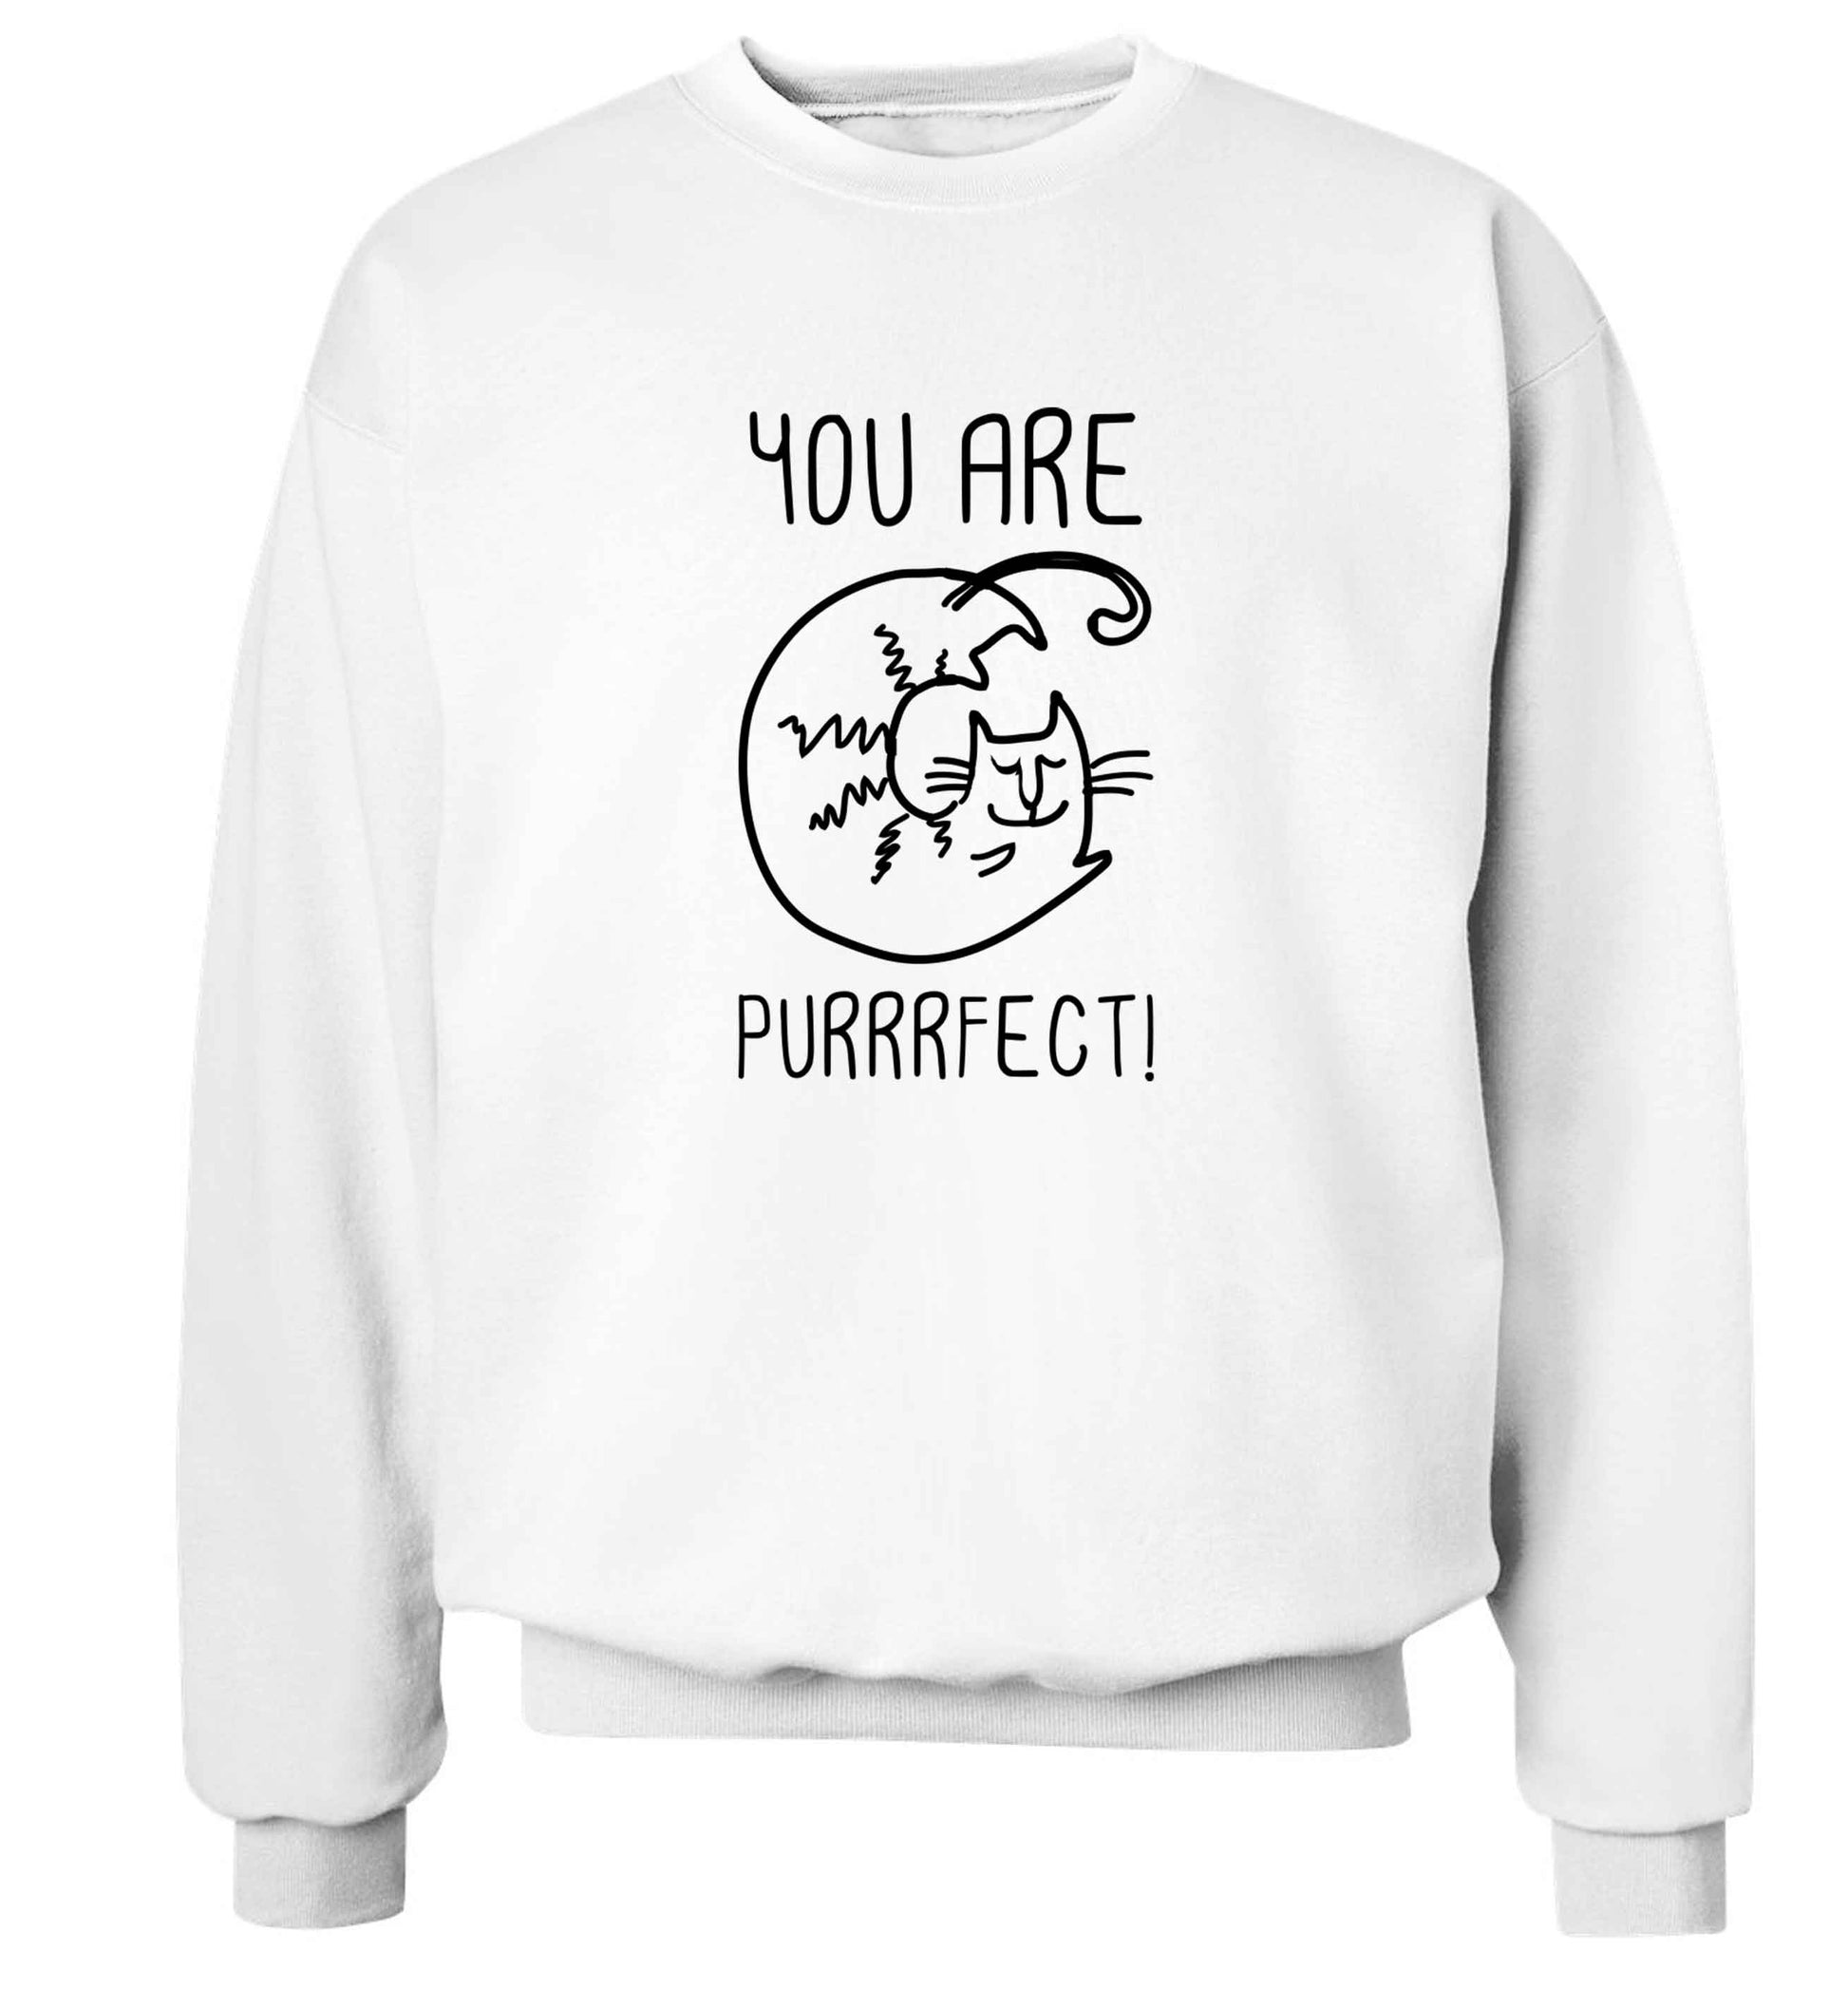 You are purrfect adult's unisex white sweater 2XL